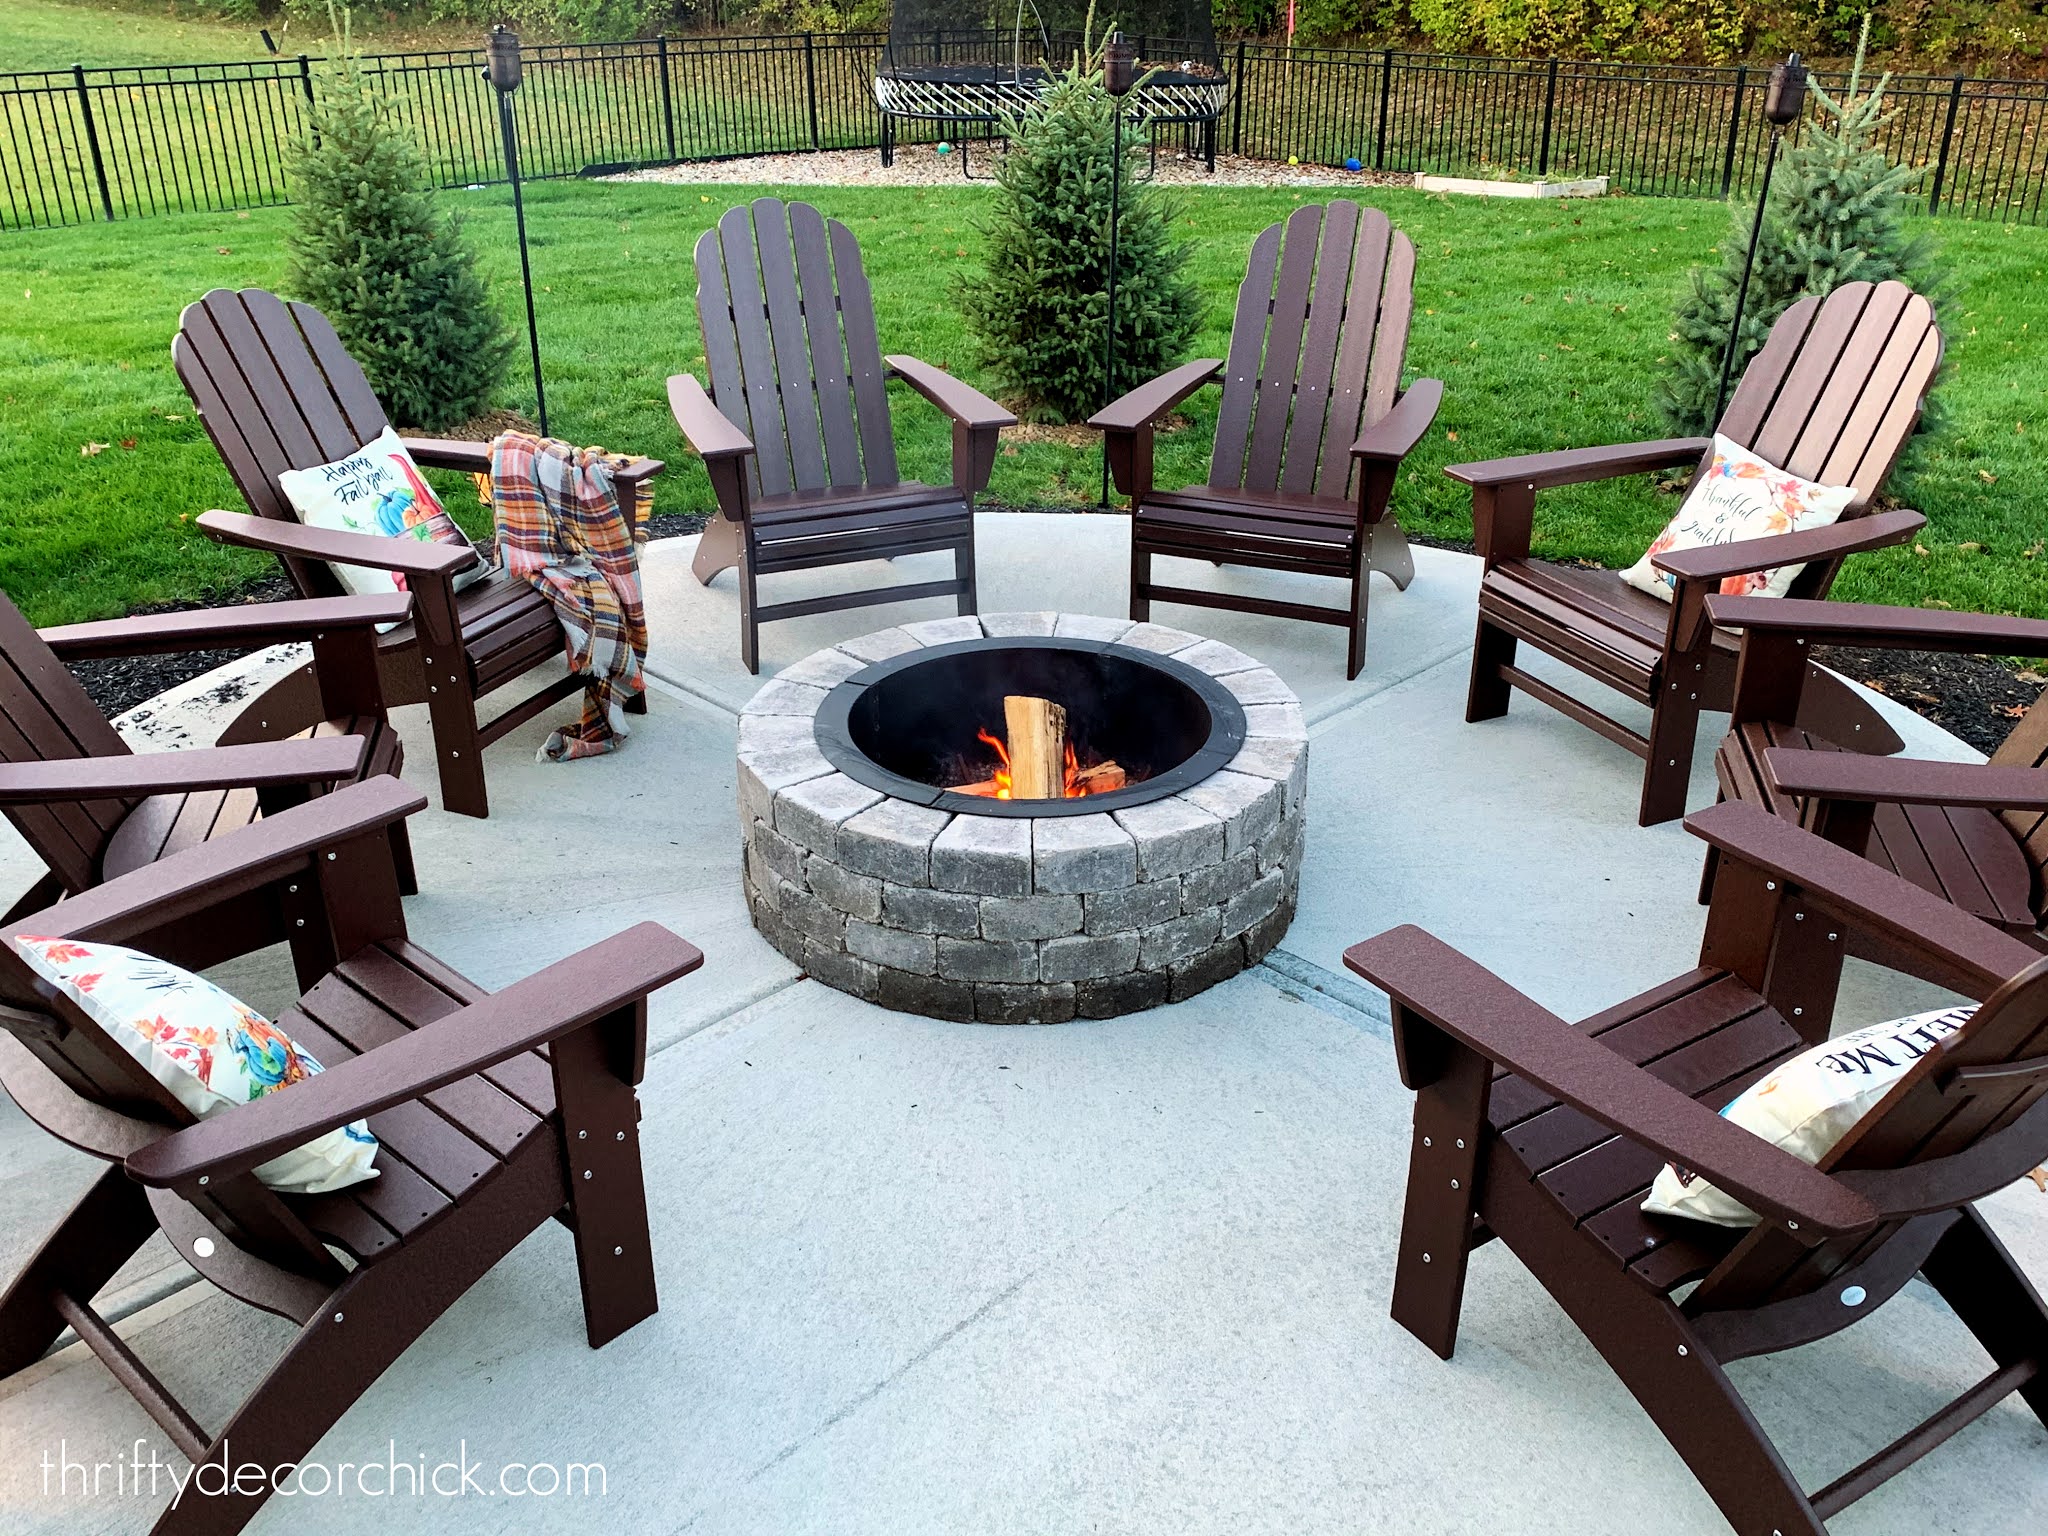 Our Cozy Round Patio Fire Pit With New, Adirondack Chairs Around Fire Pit